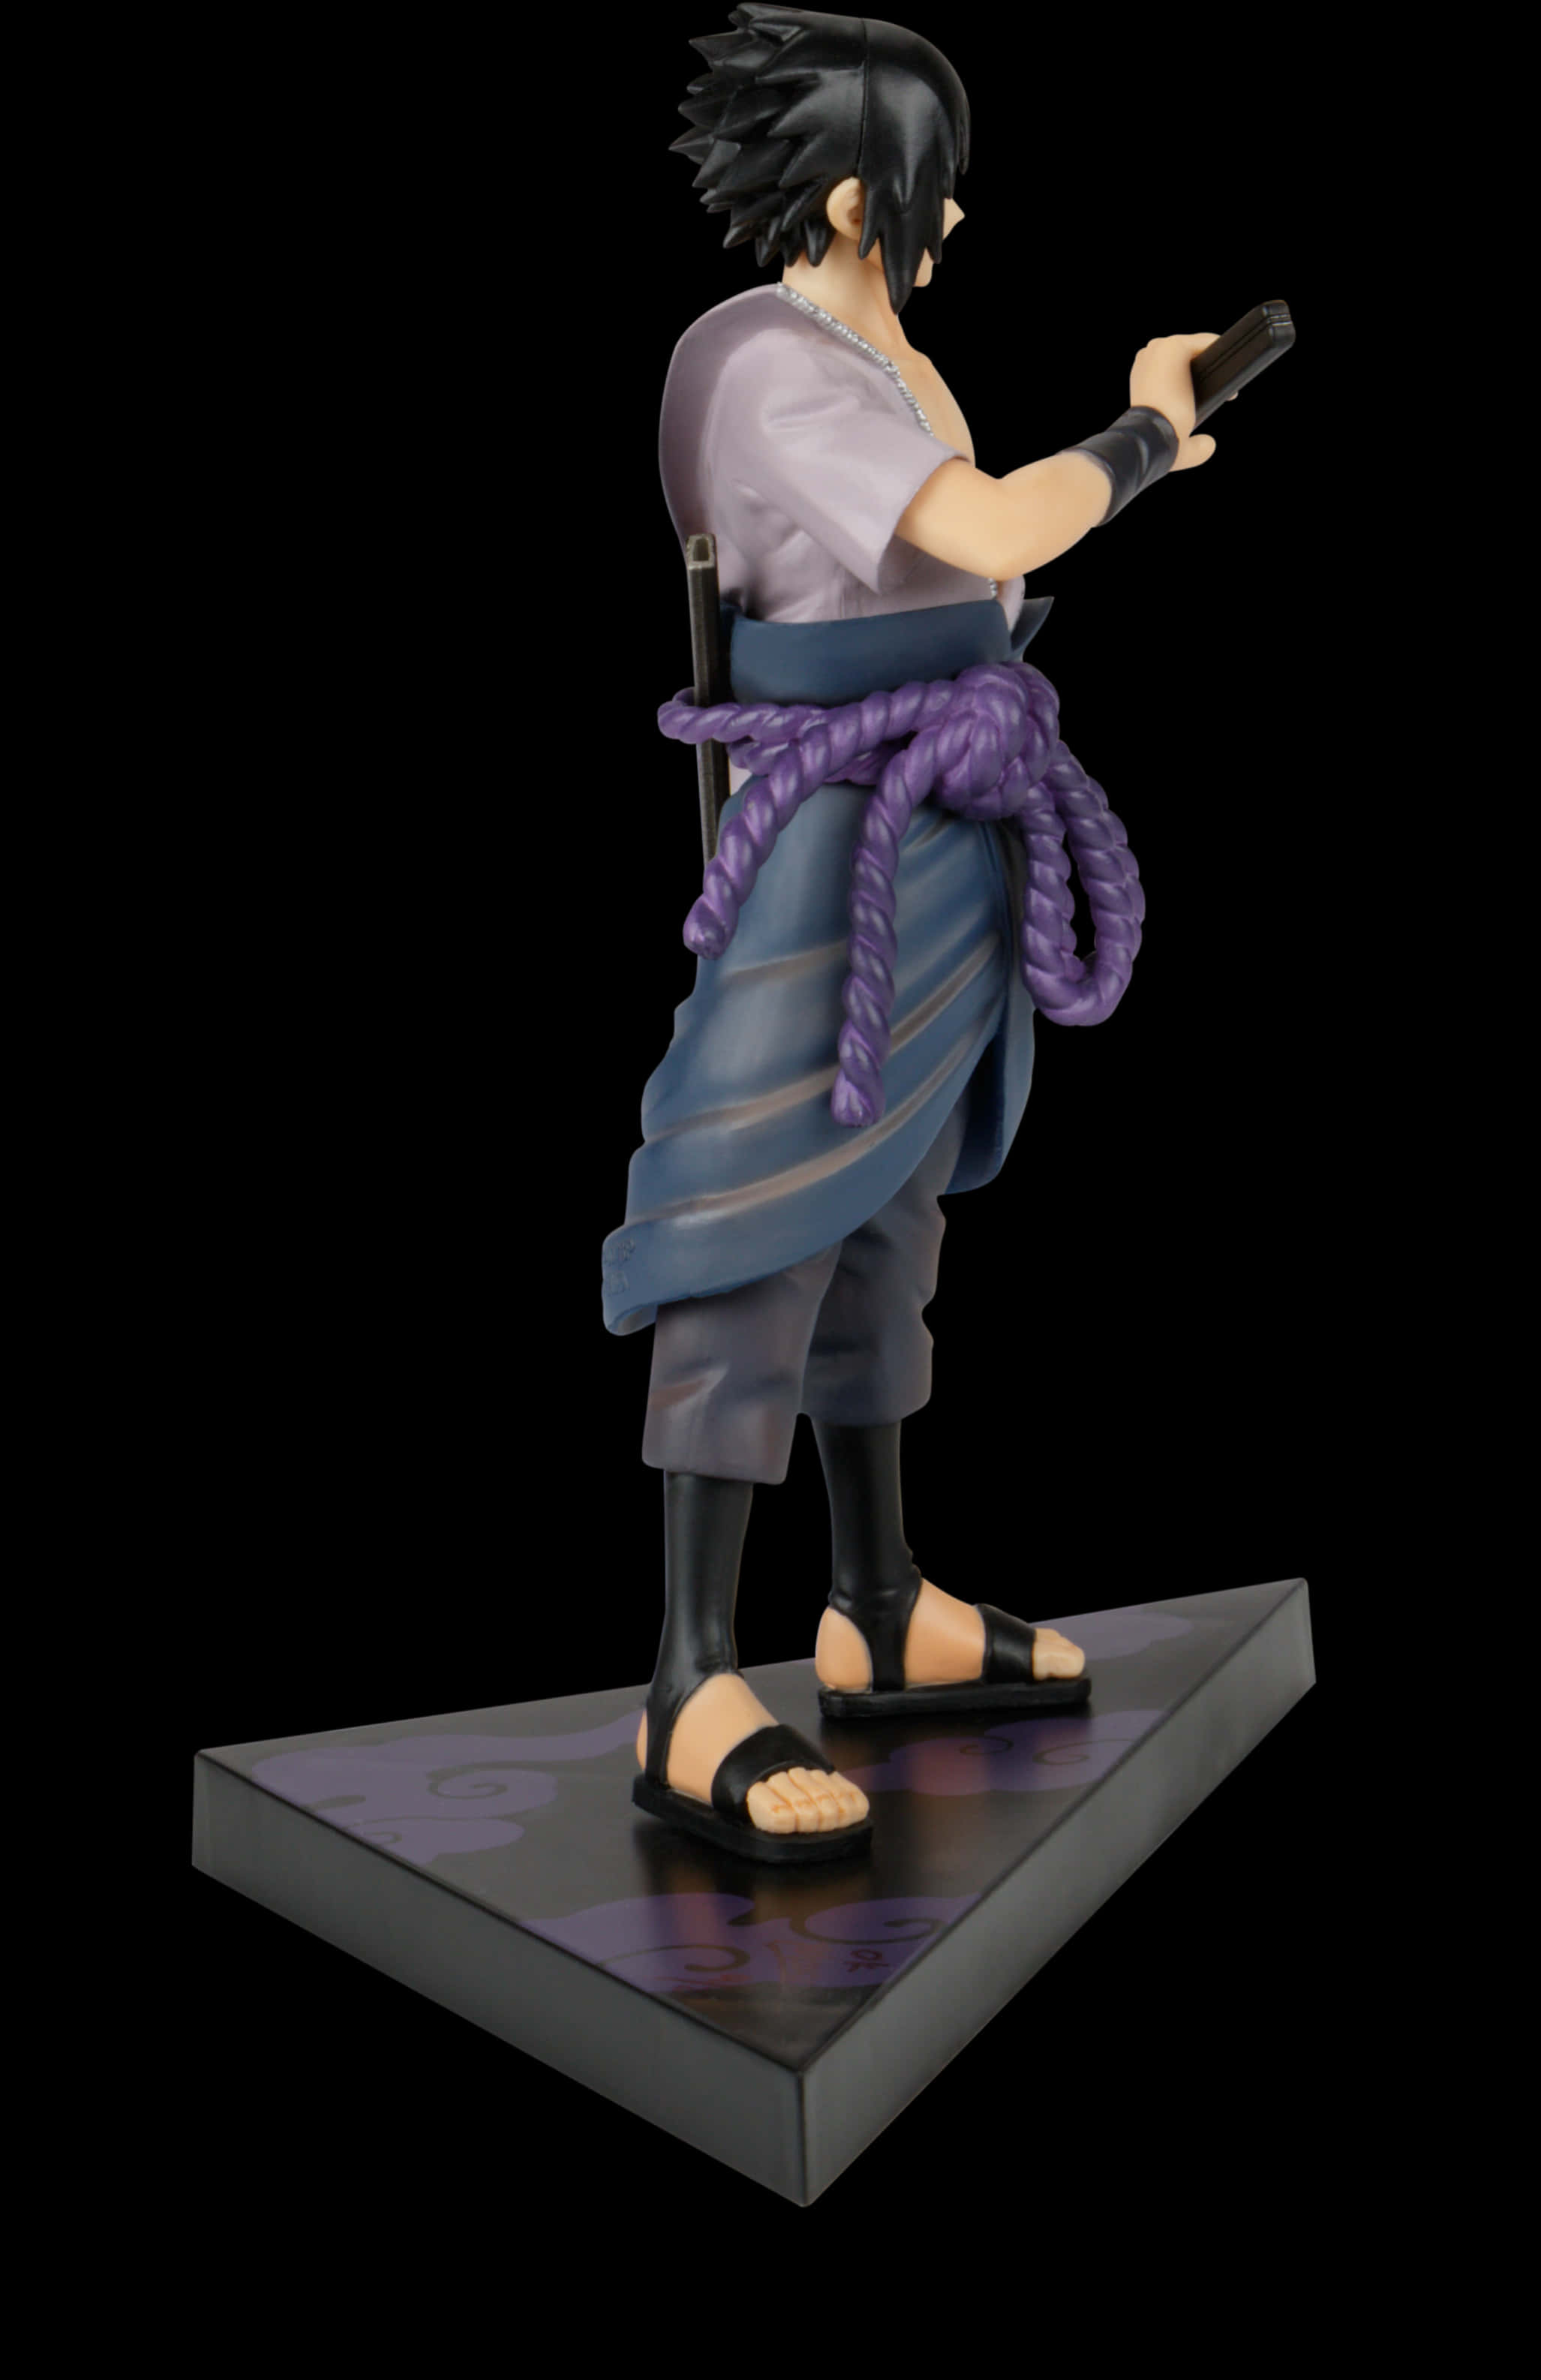 A Statue Of A Man With A Purple Rope